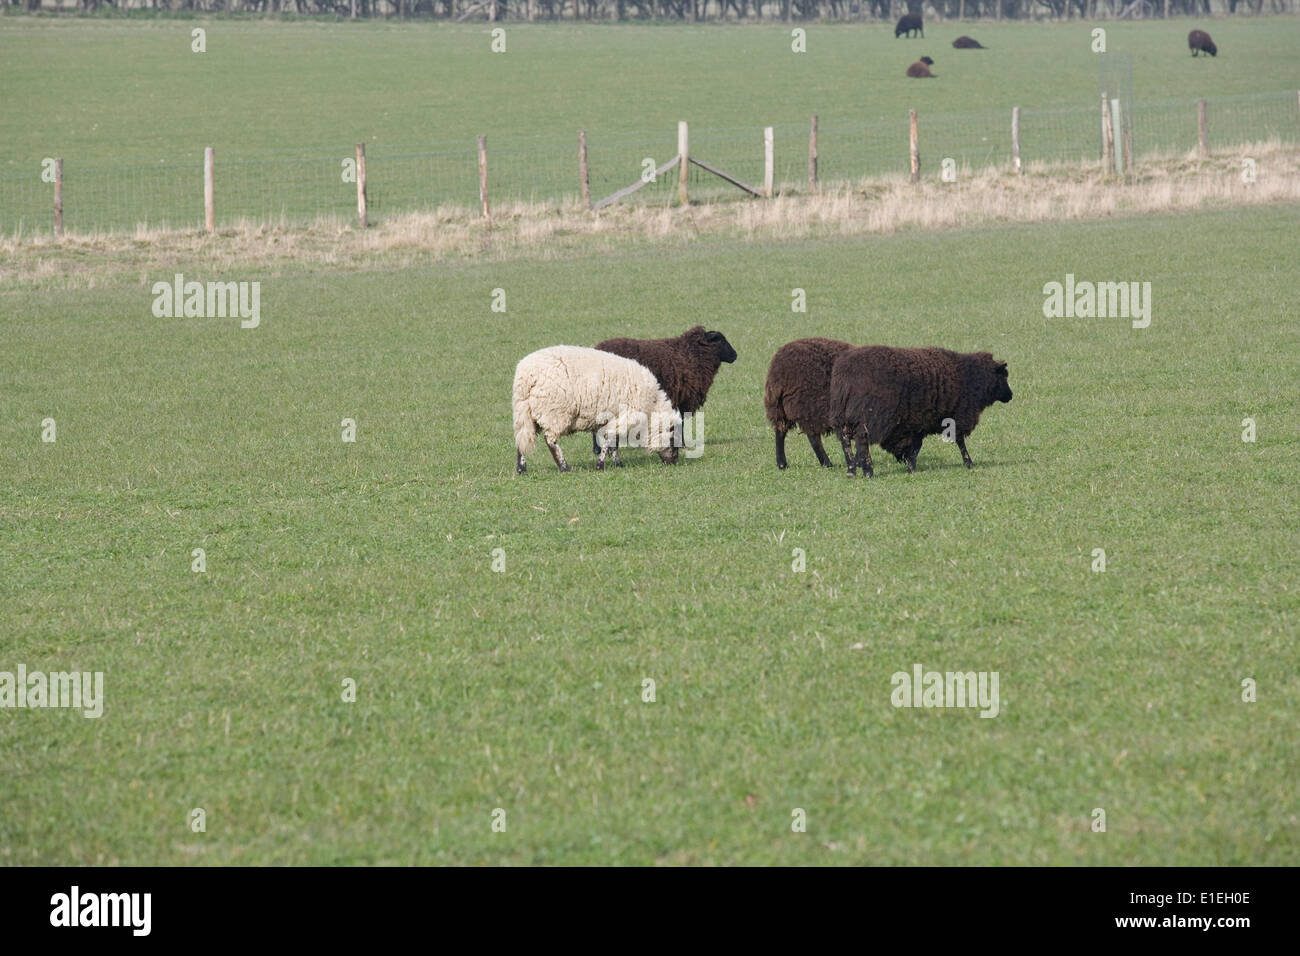 Black & White sheep in a field Banque D'Images